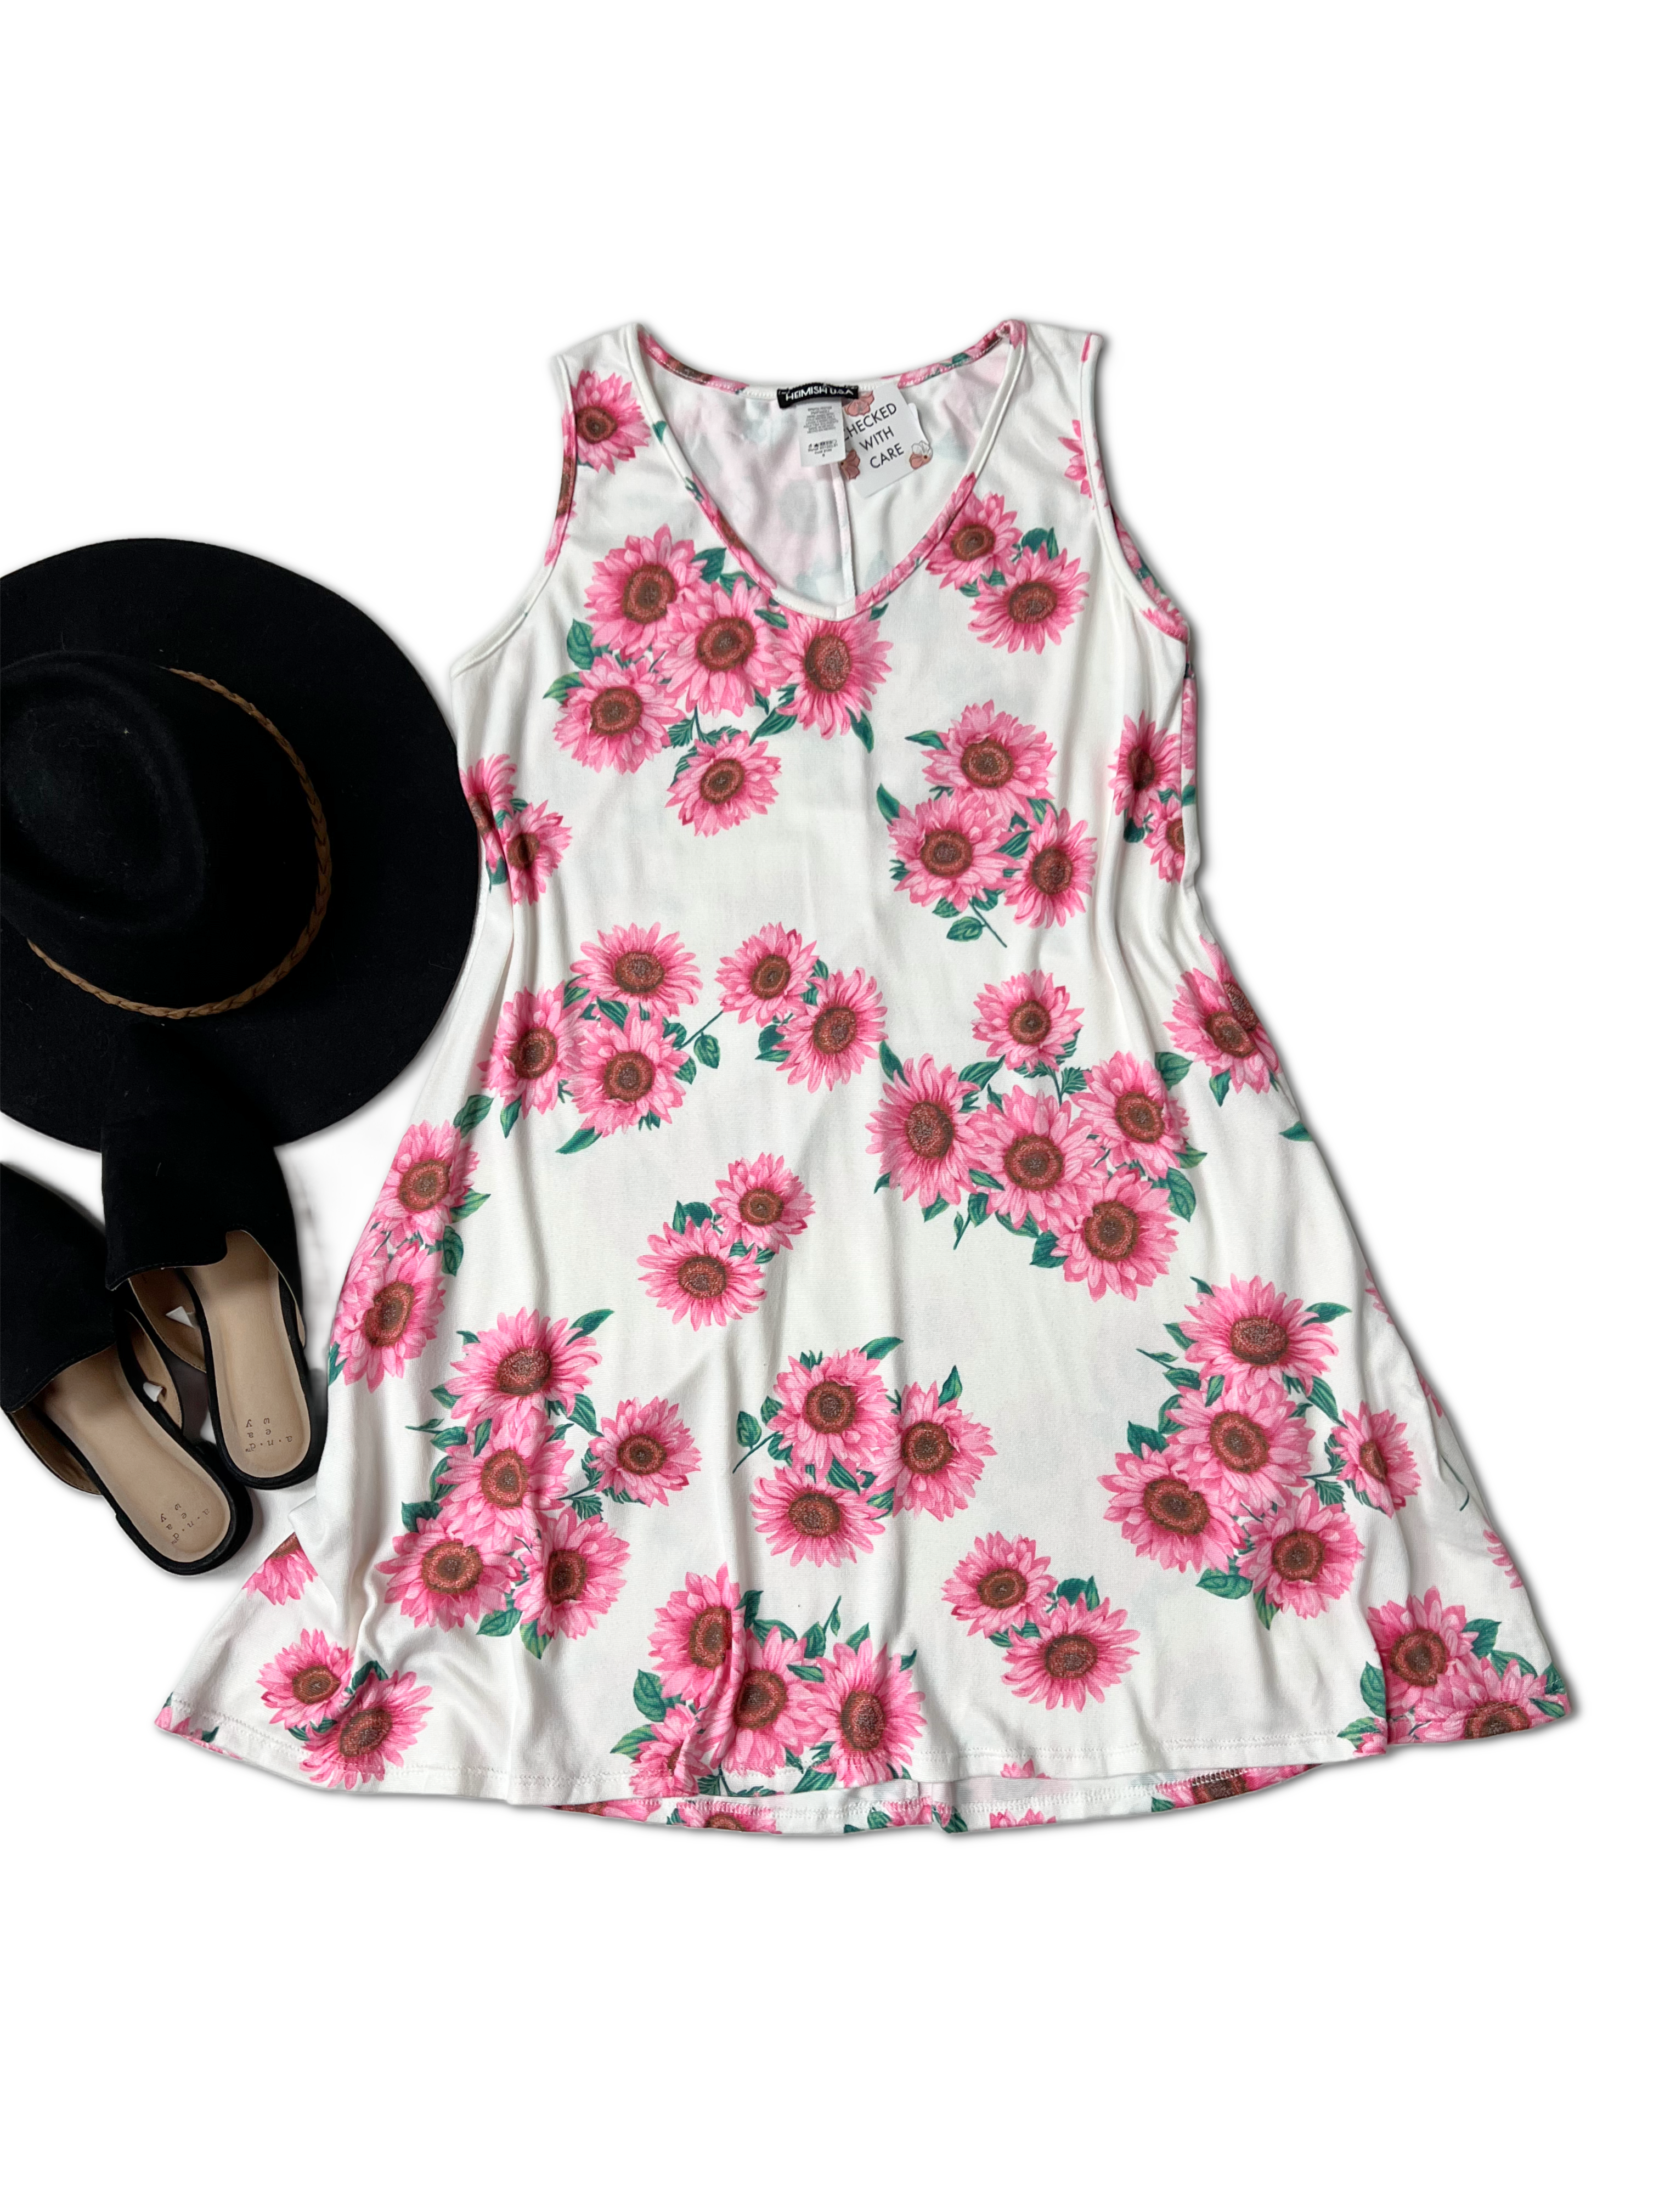 Pink Sunflowers - Swing Dress  Boutique Simplified   